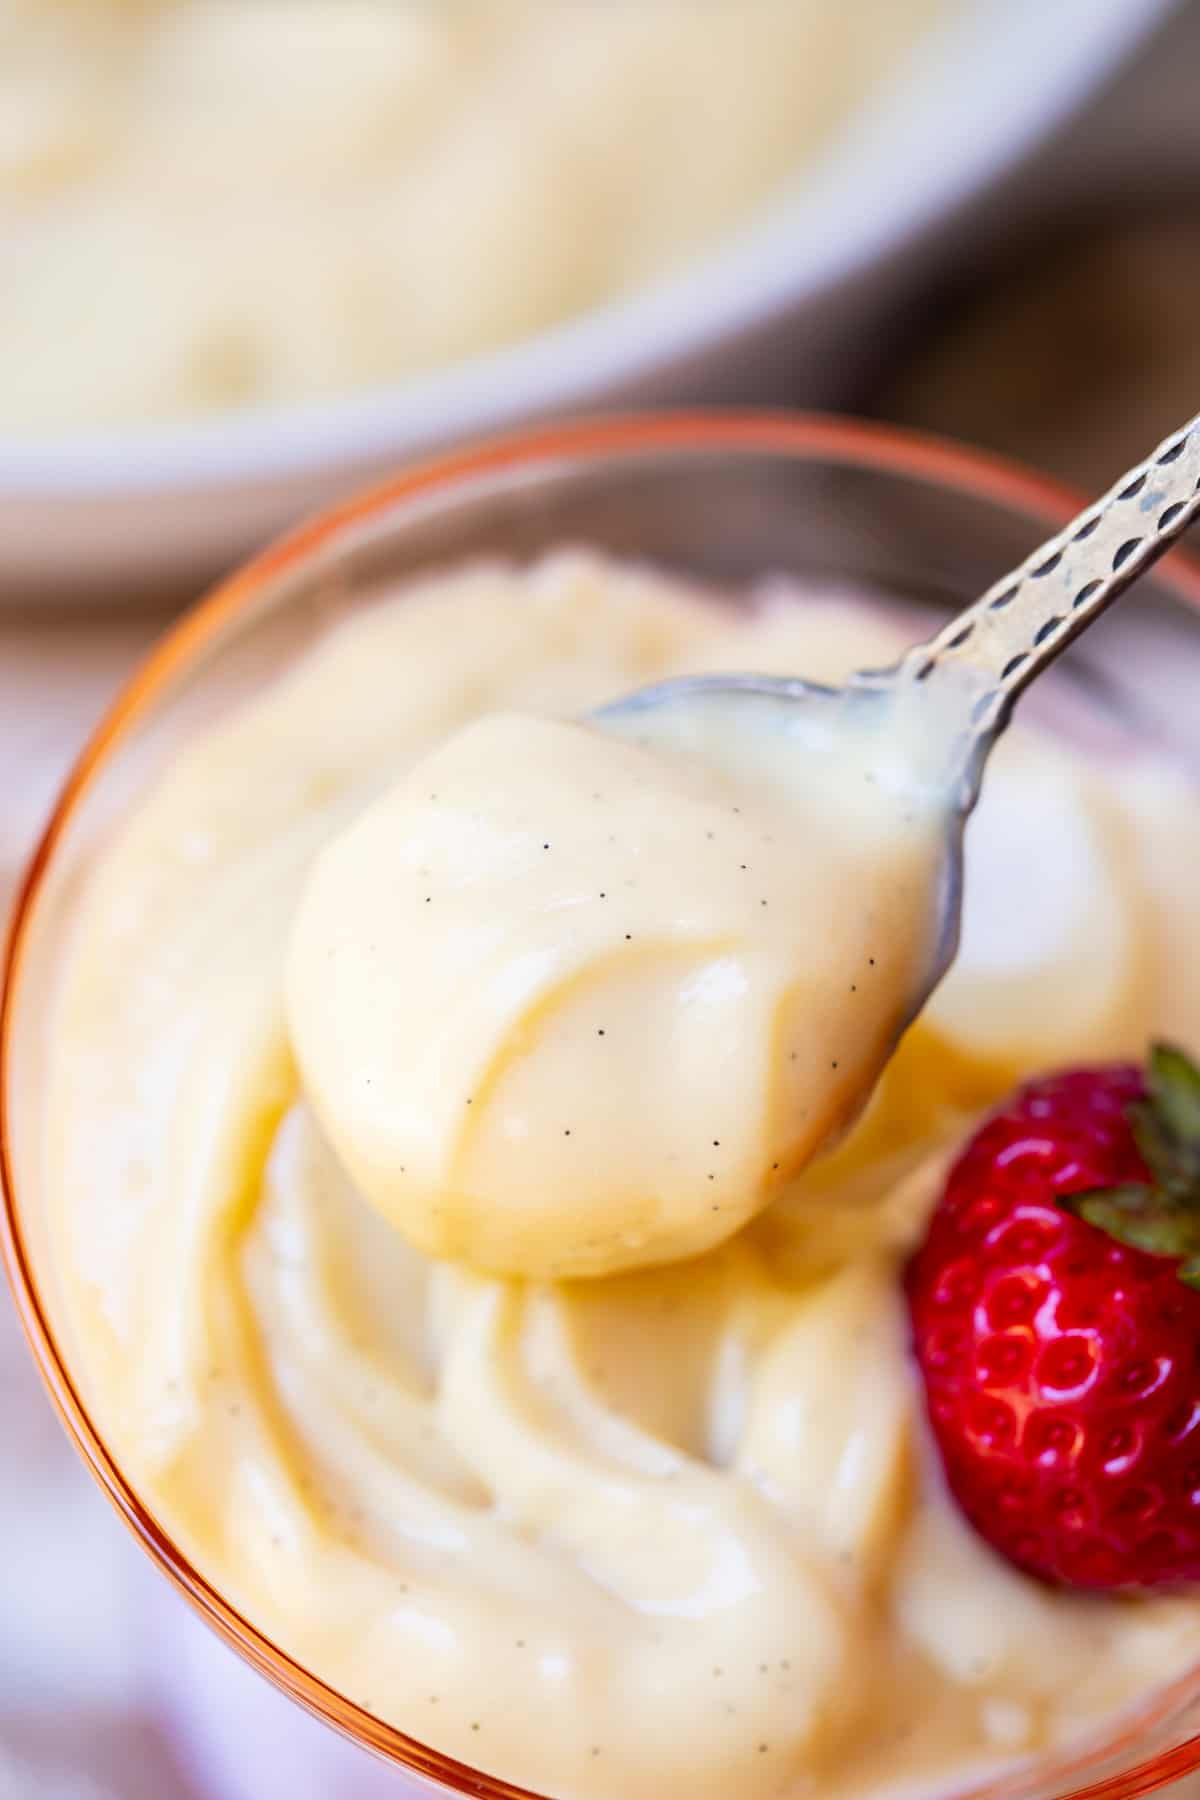 a spoon filled with vanilla pudding from scratch being lifted from a glass dish.